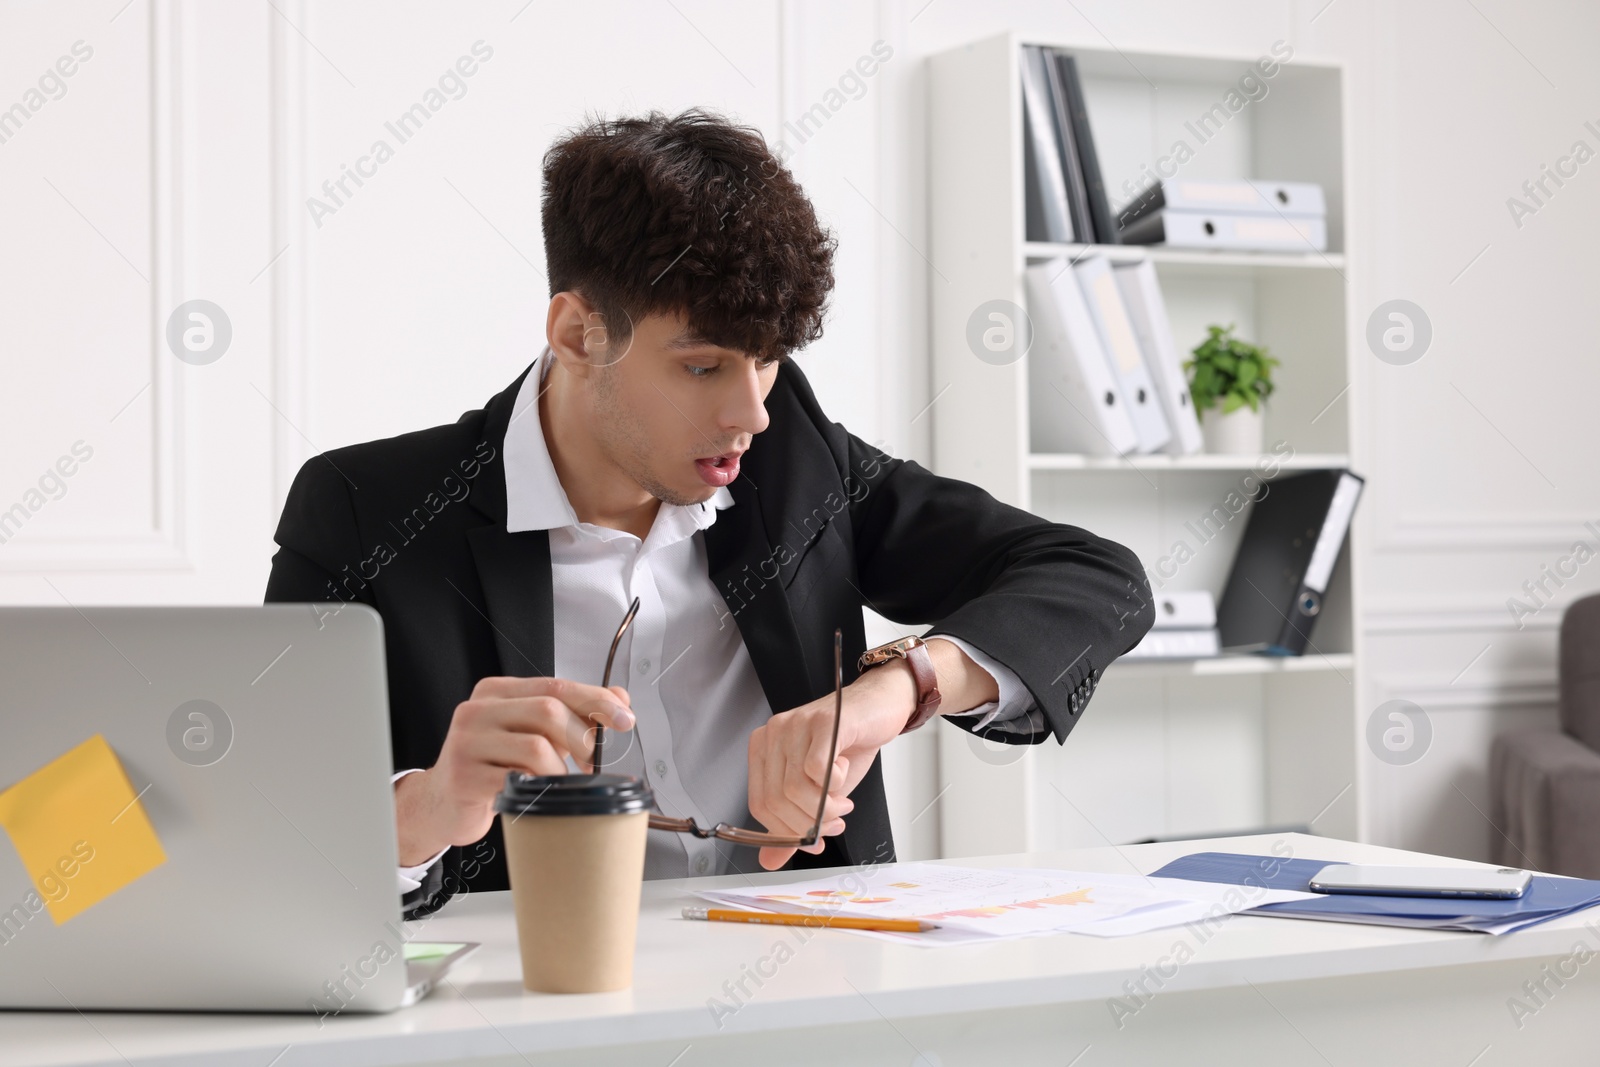 Photo of Emotional young man working at table in office. Deadline concept